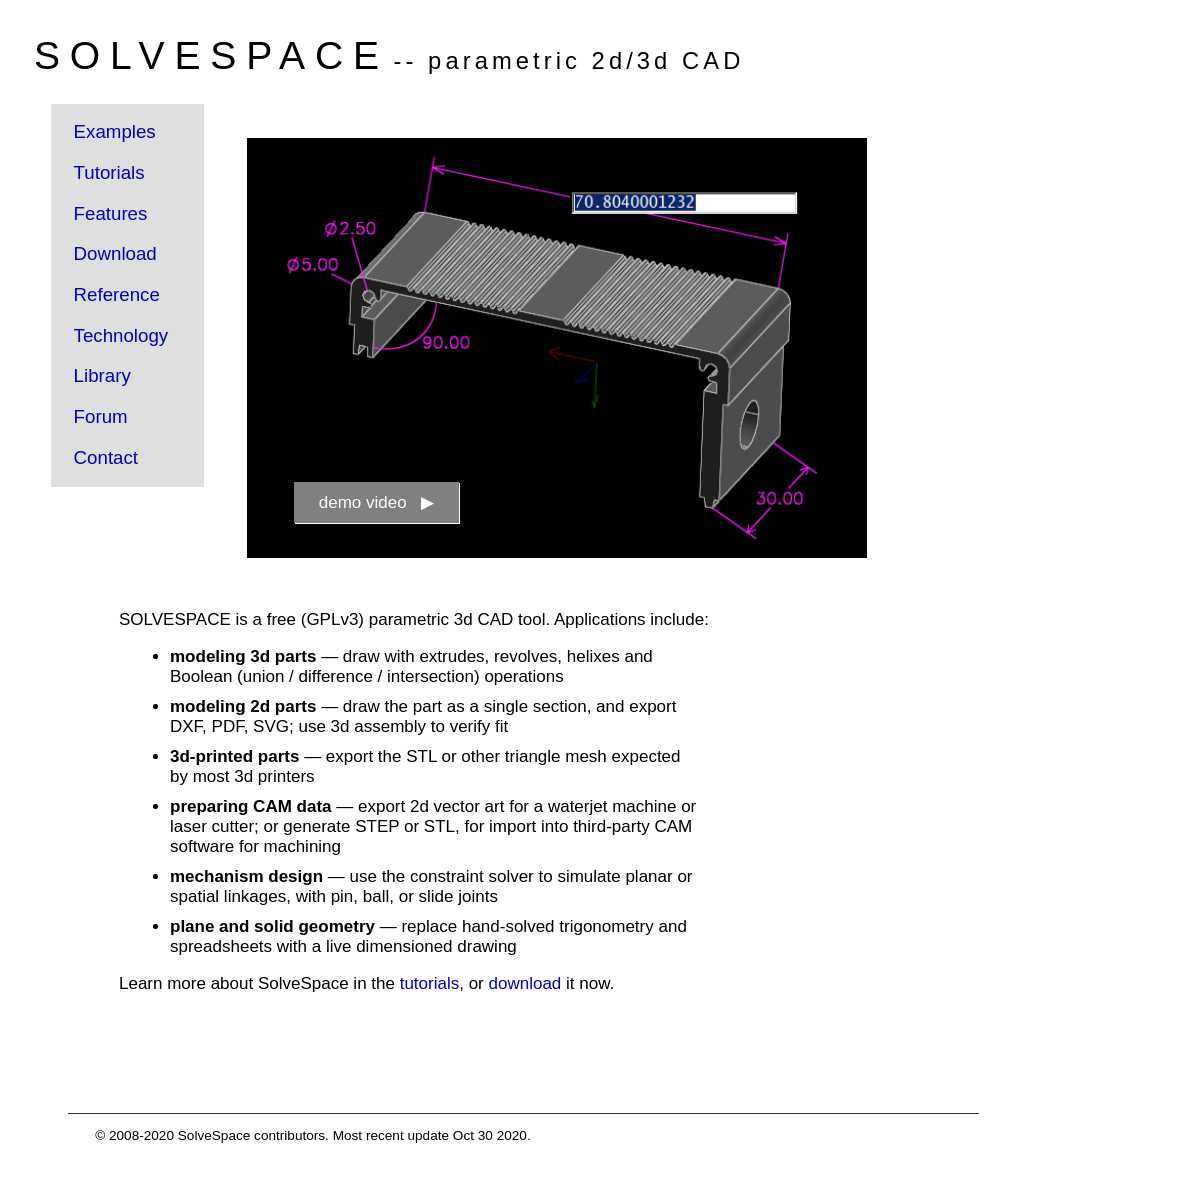 A complete backup of solvespace.com